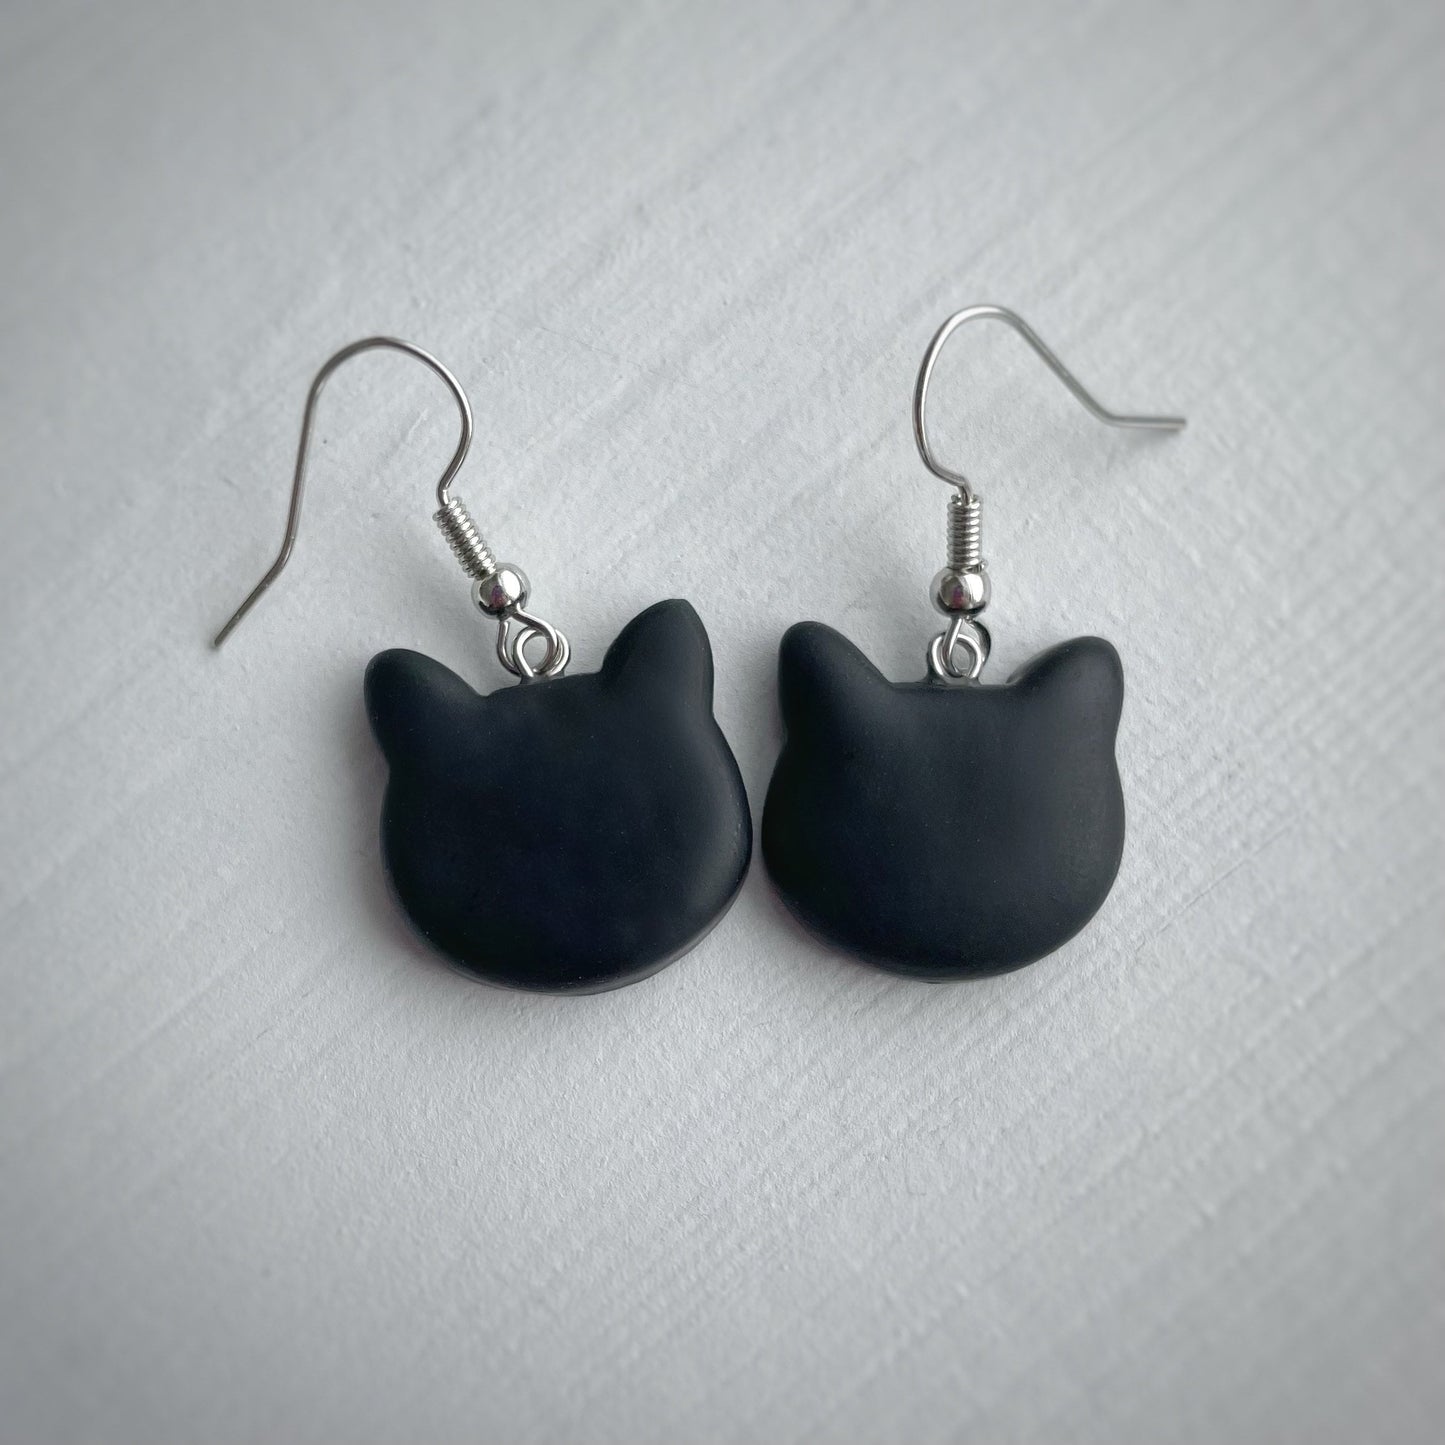 Black Cat Earrings from Impressions with Clay | Polymer Clay